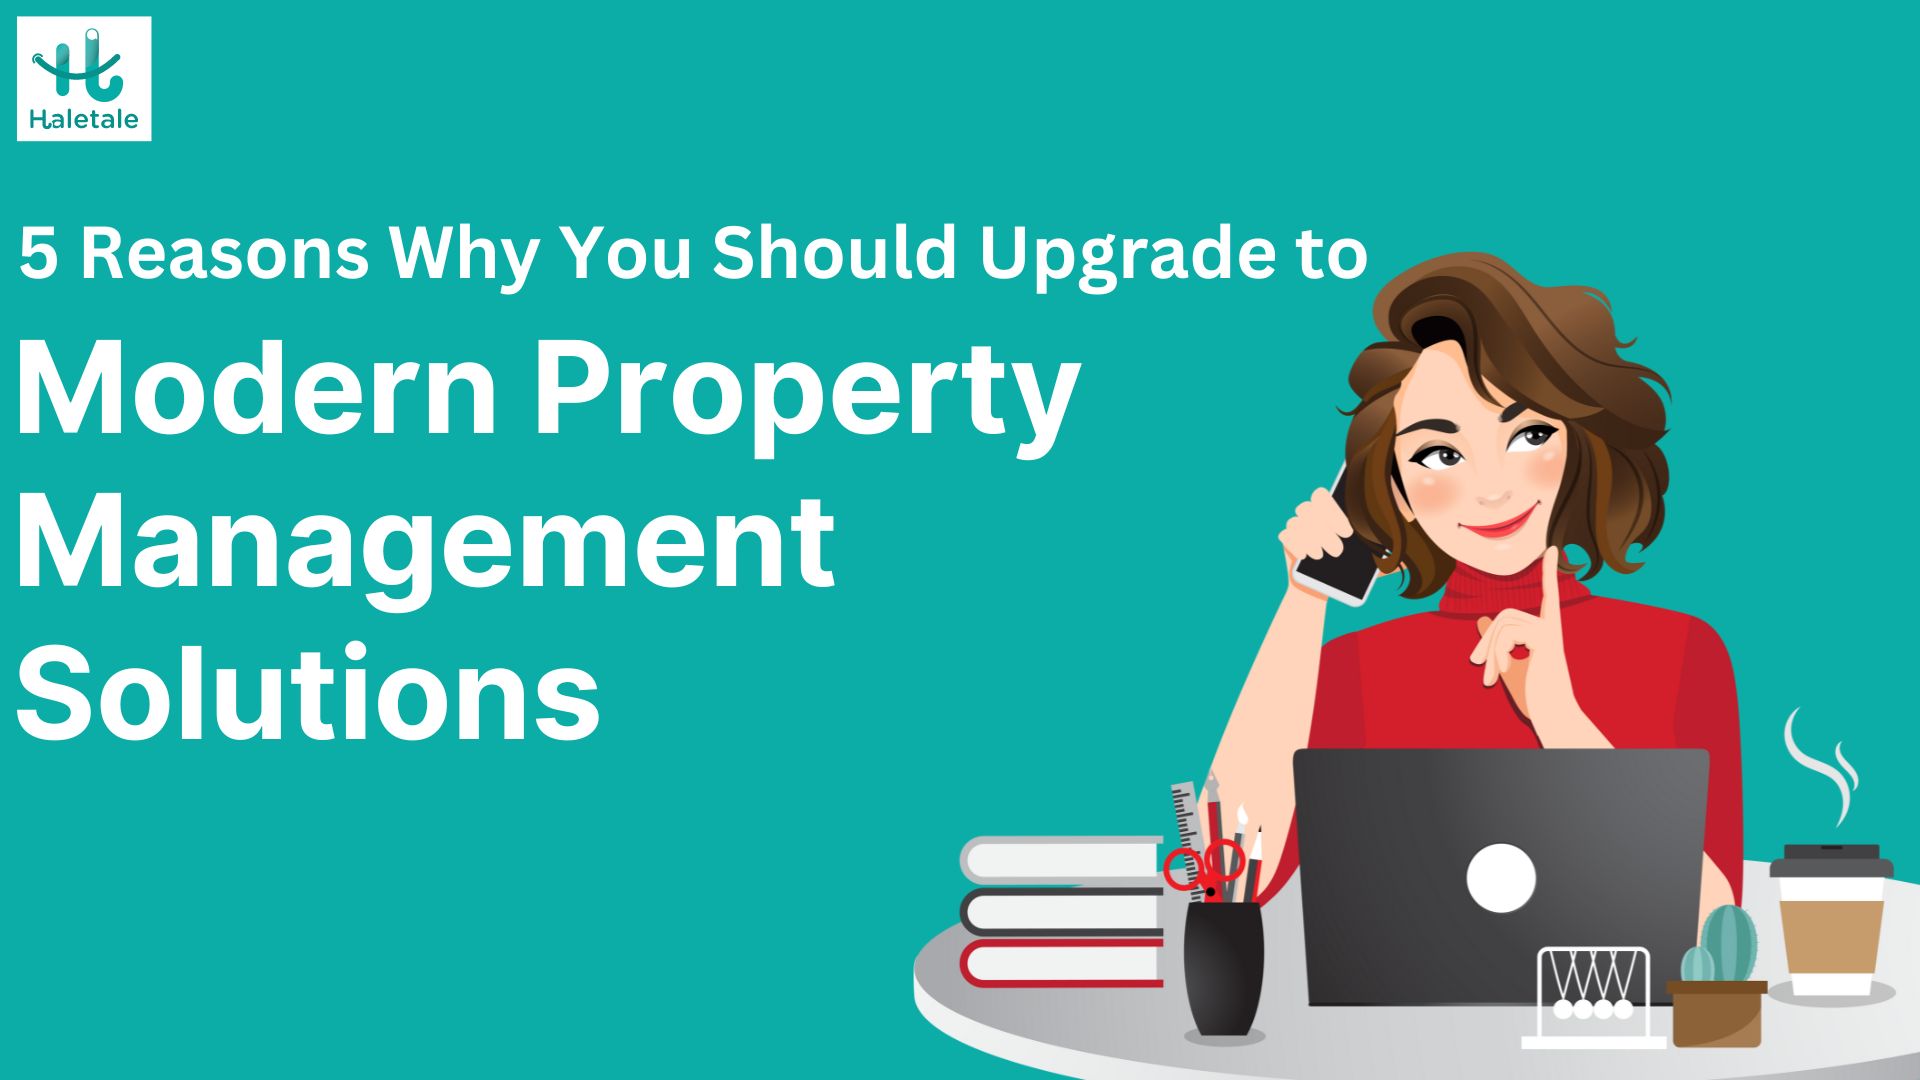 Modern Property Management Solutions